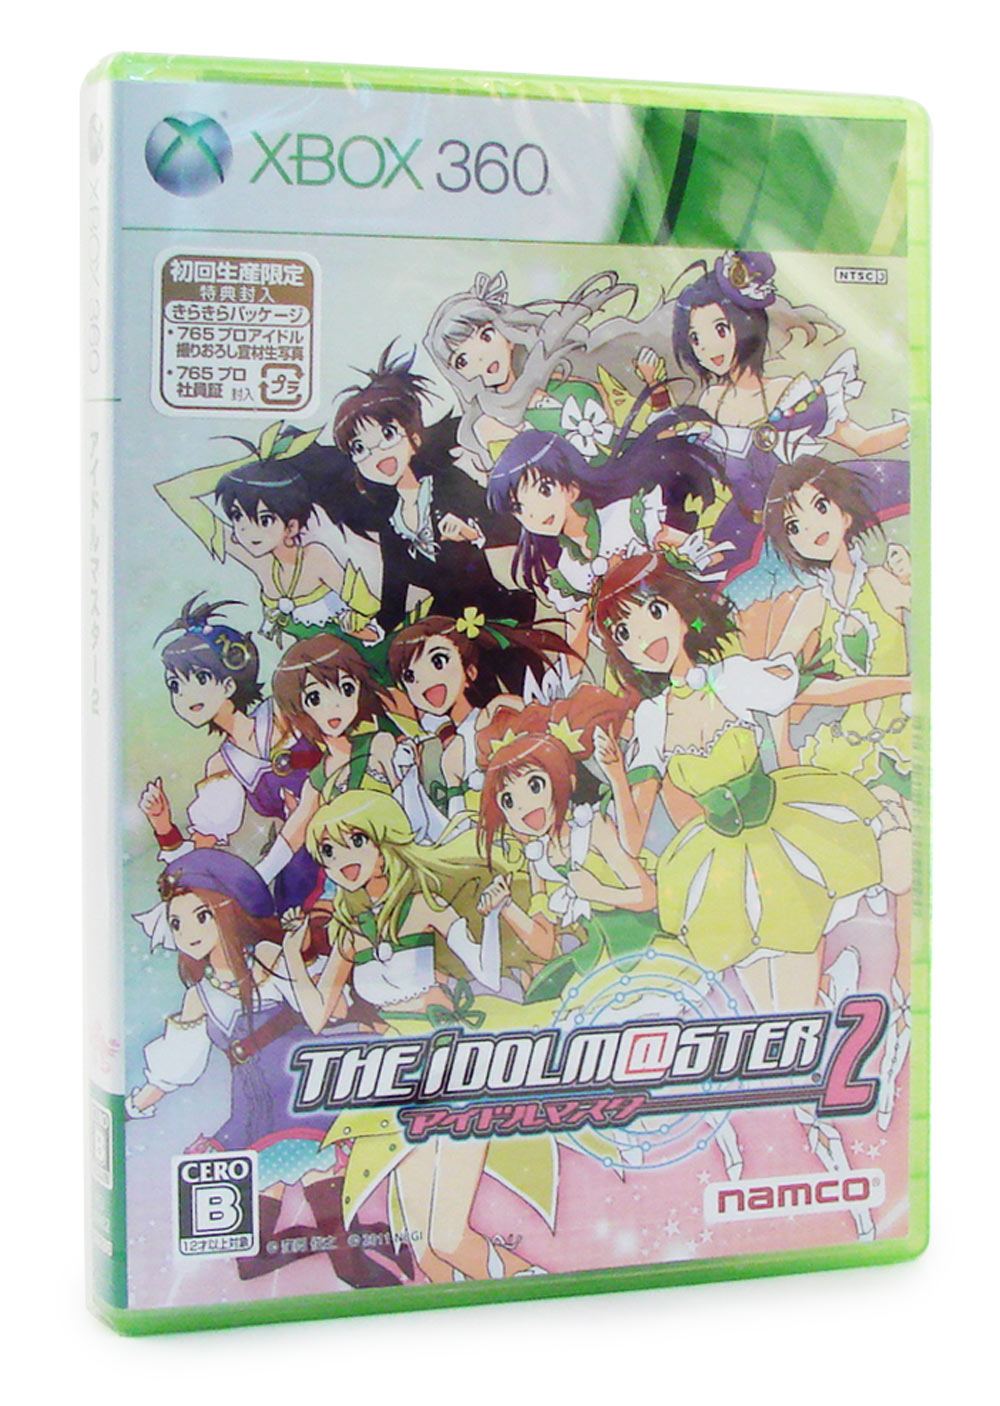 idolm@ster 2 ps3 english patch